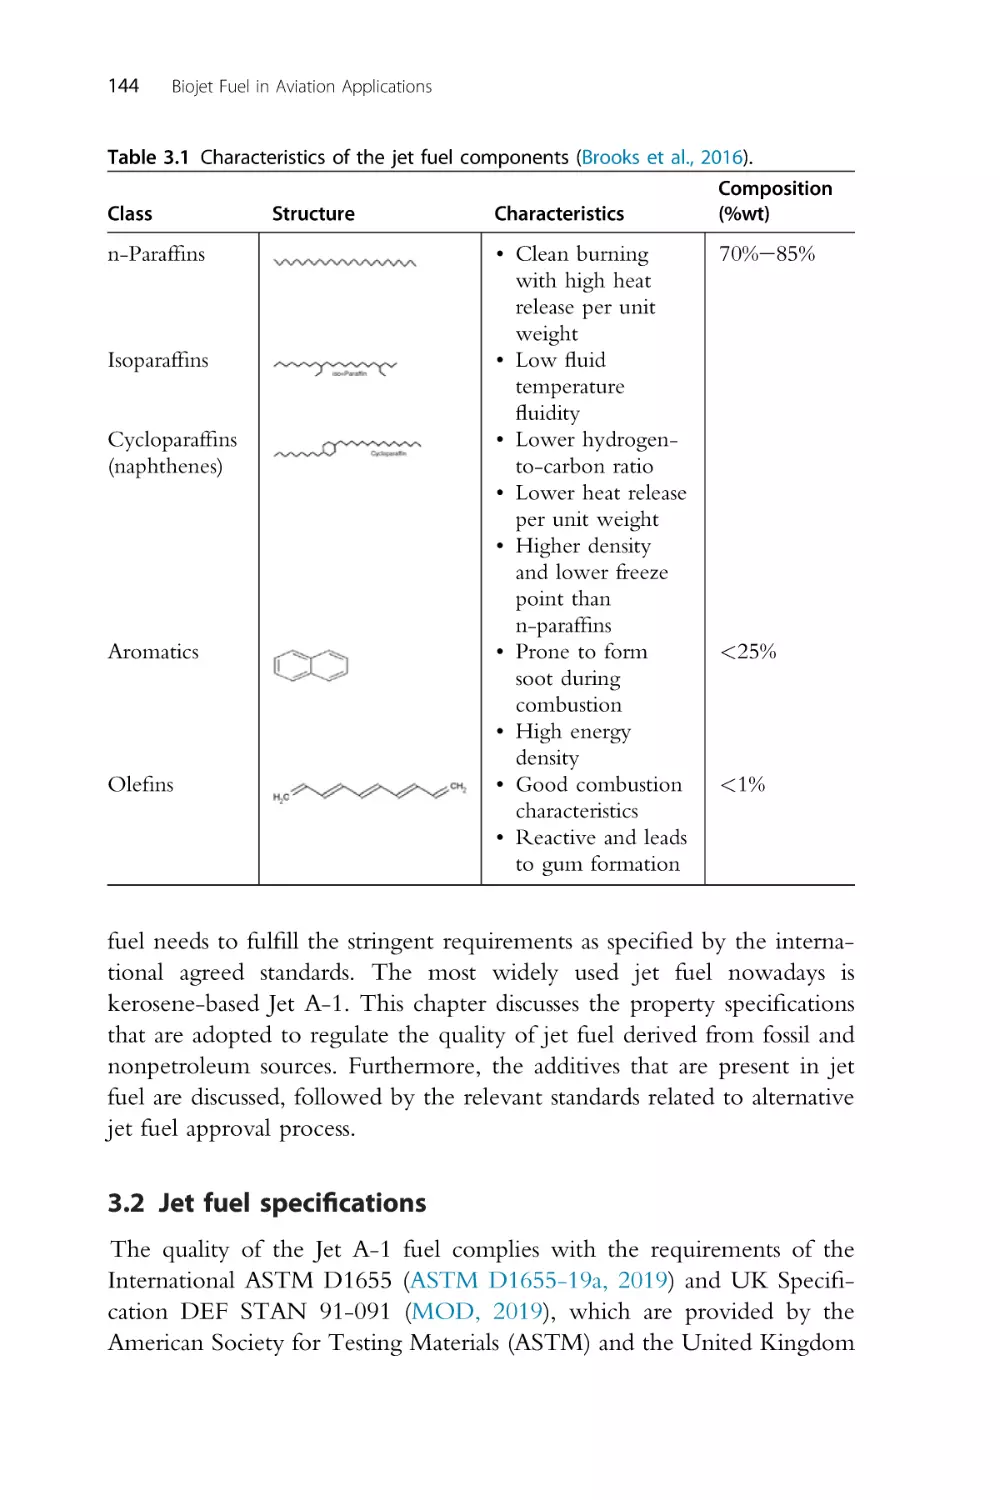 3.2 Jet fuel specifications